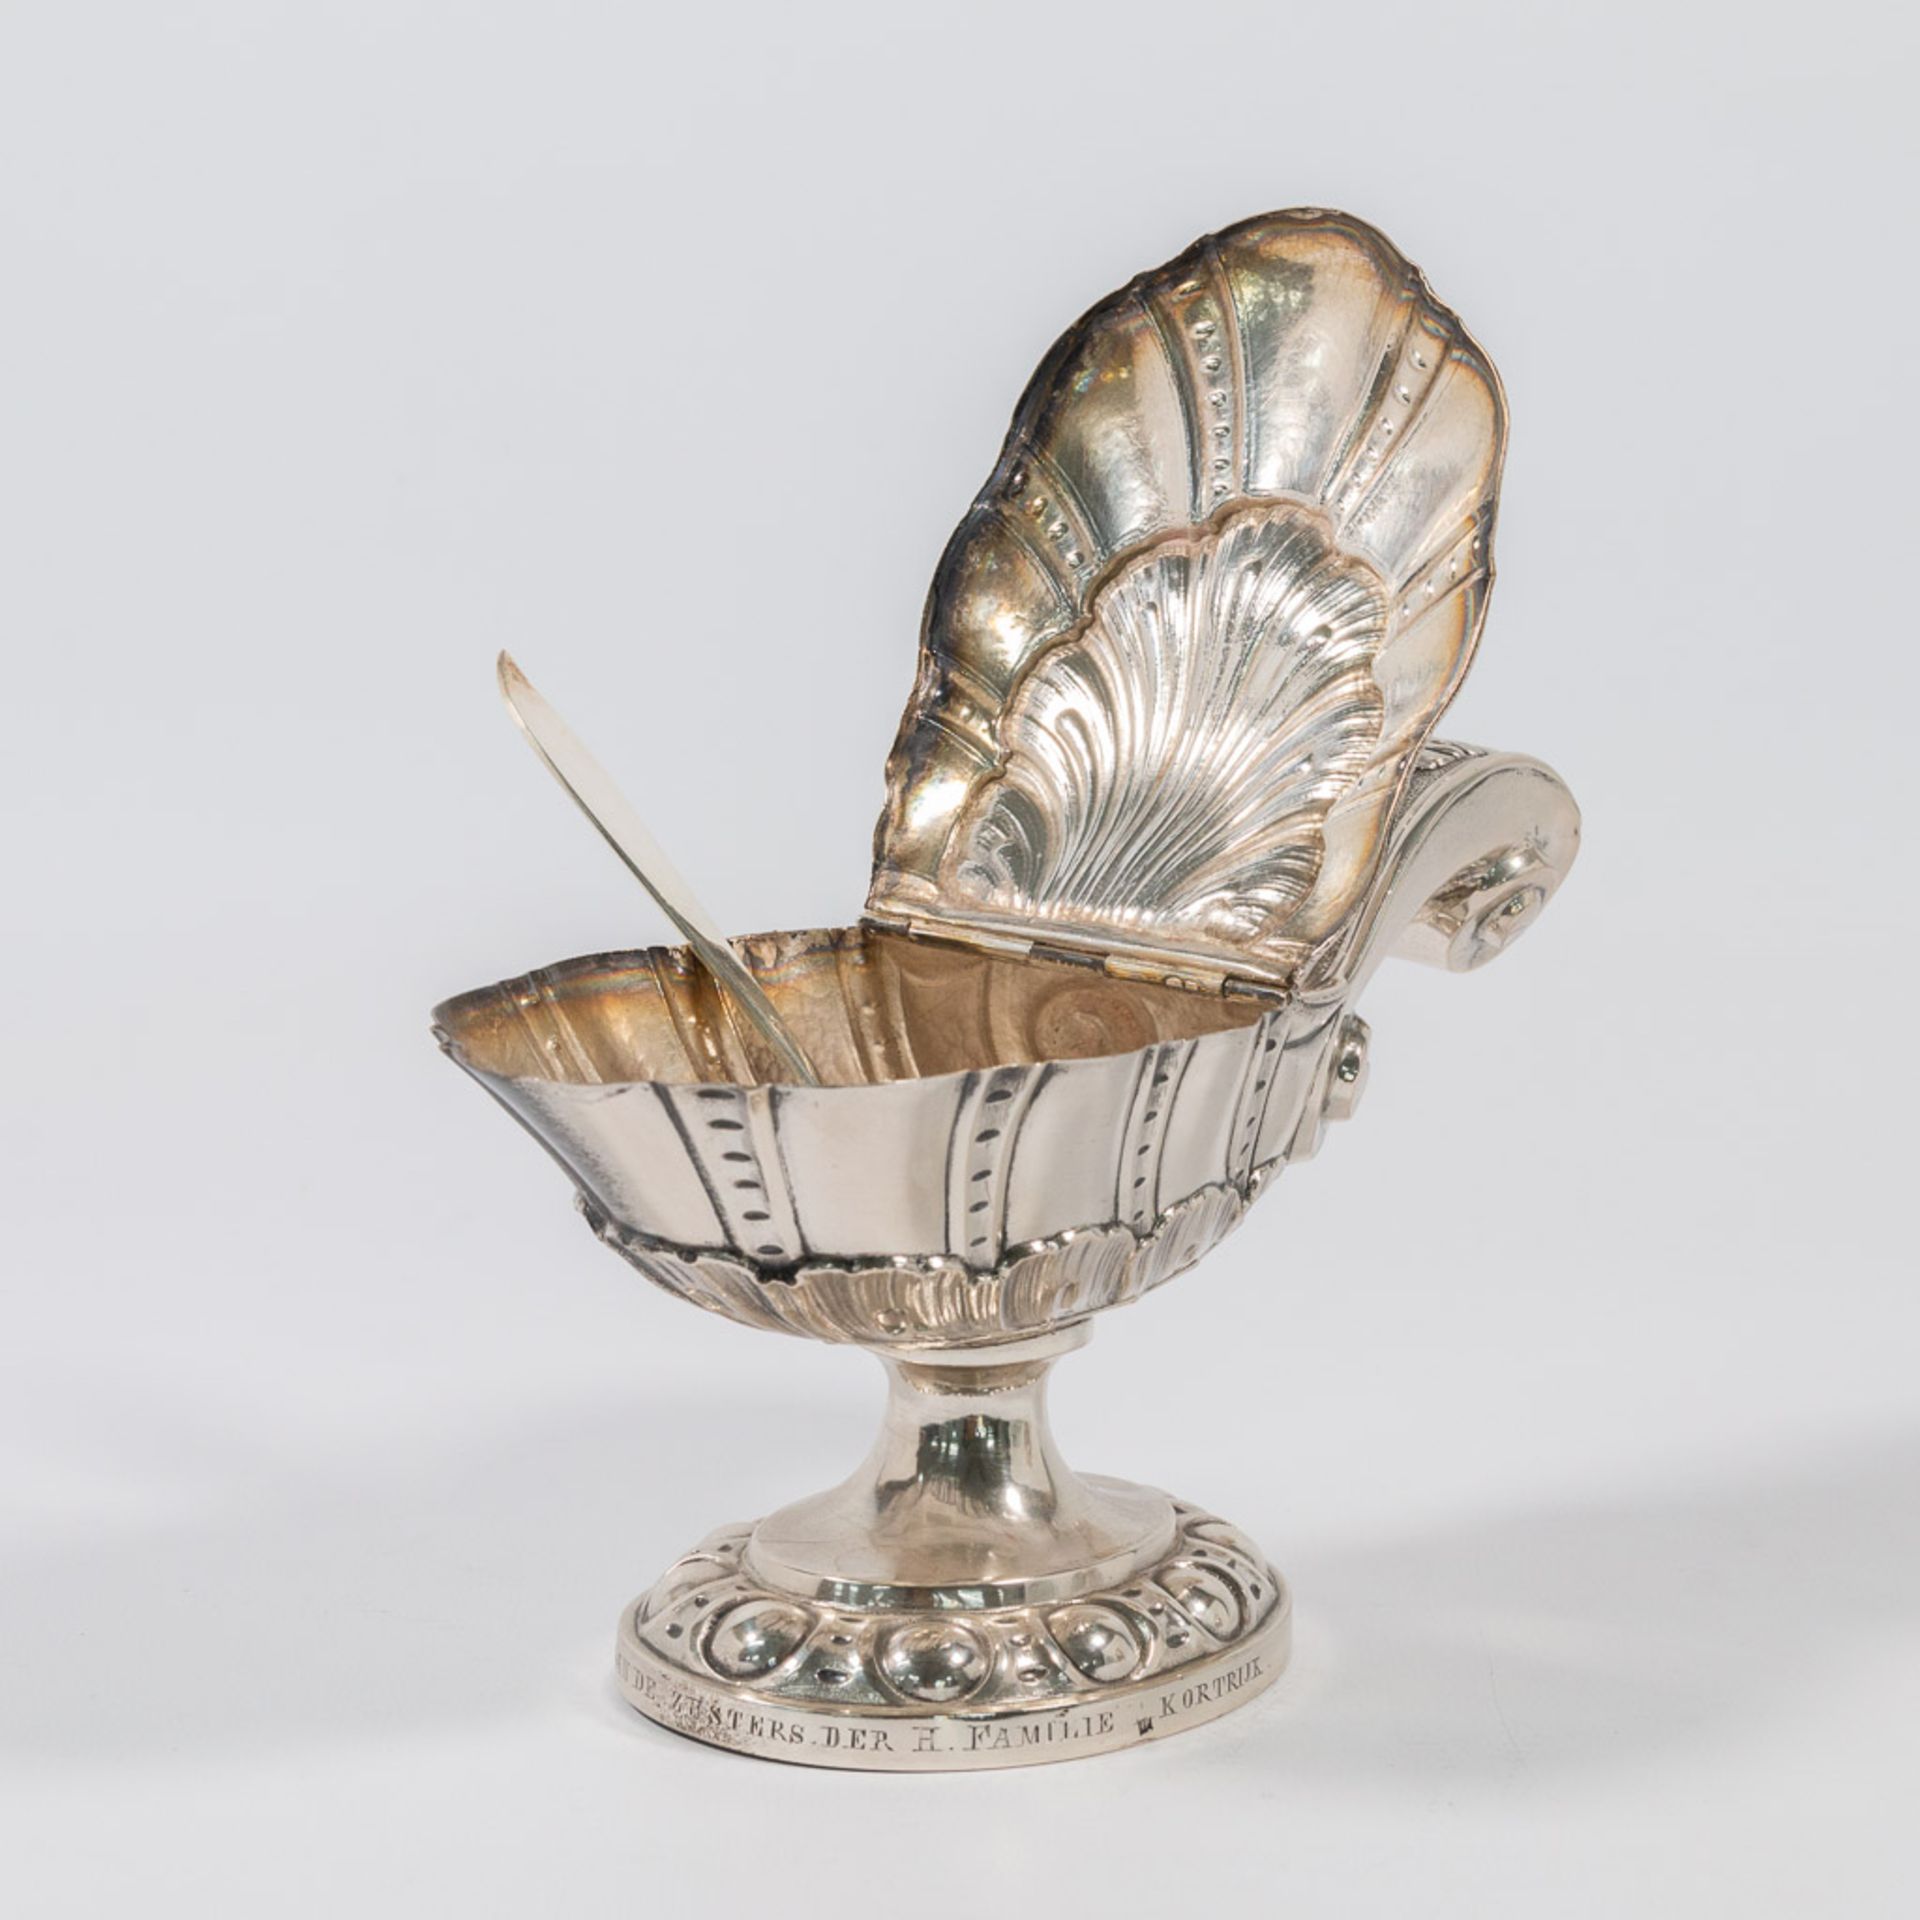 A silver Insence burner and Insence jar. - Image 15 of 39